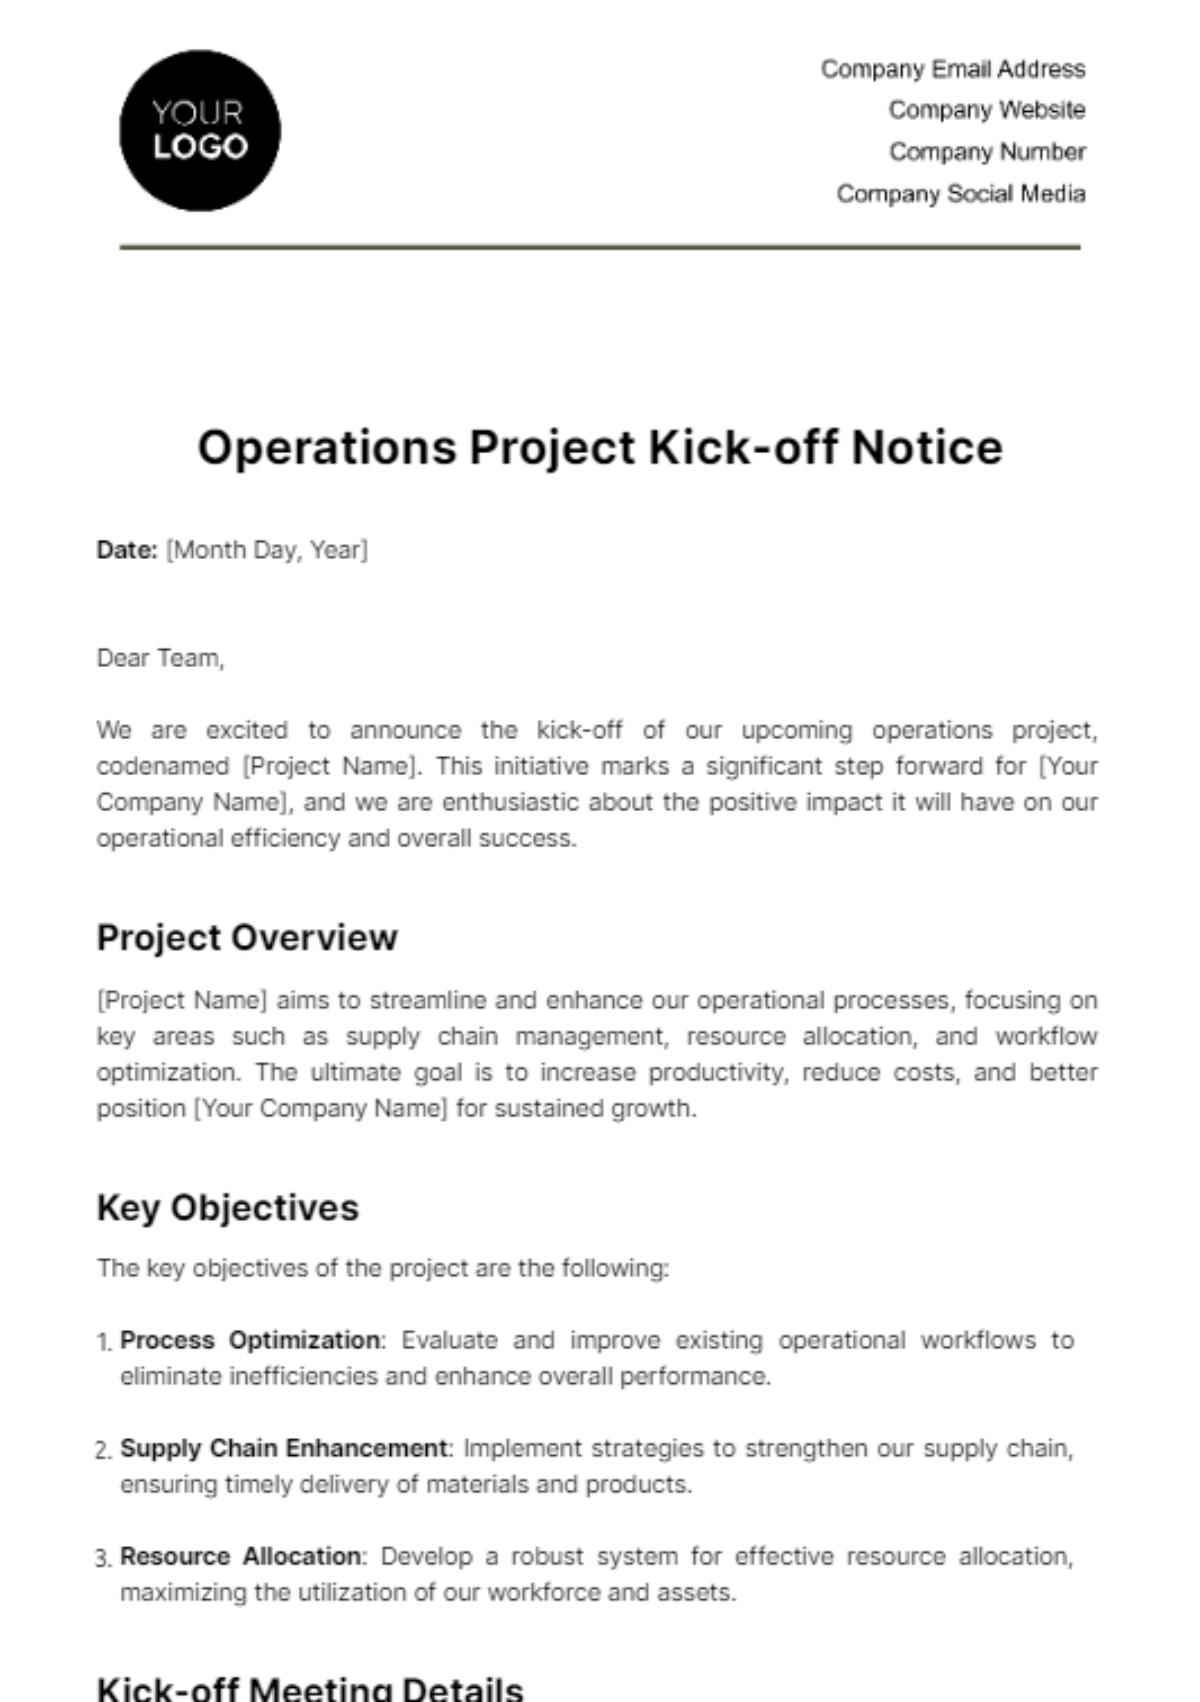 Free Operations Project Kick-off Notice Template